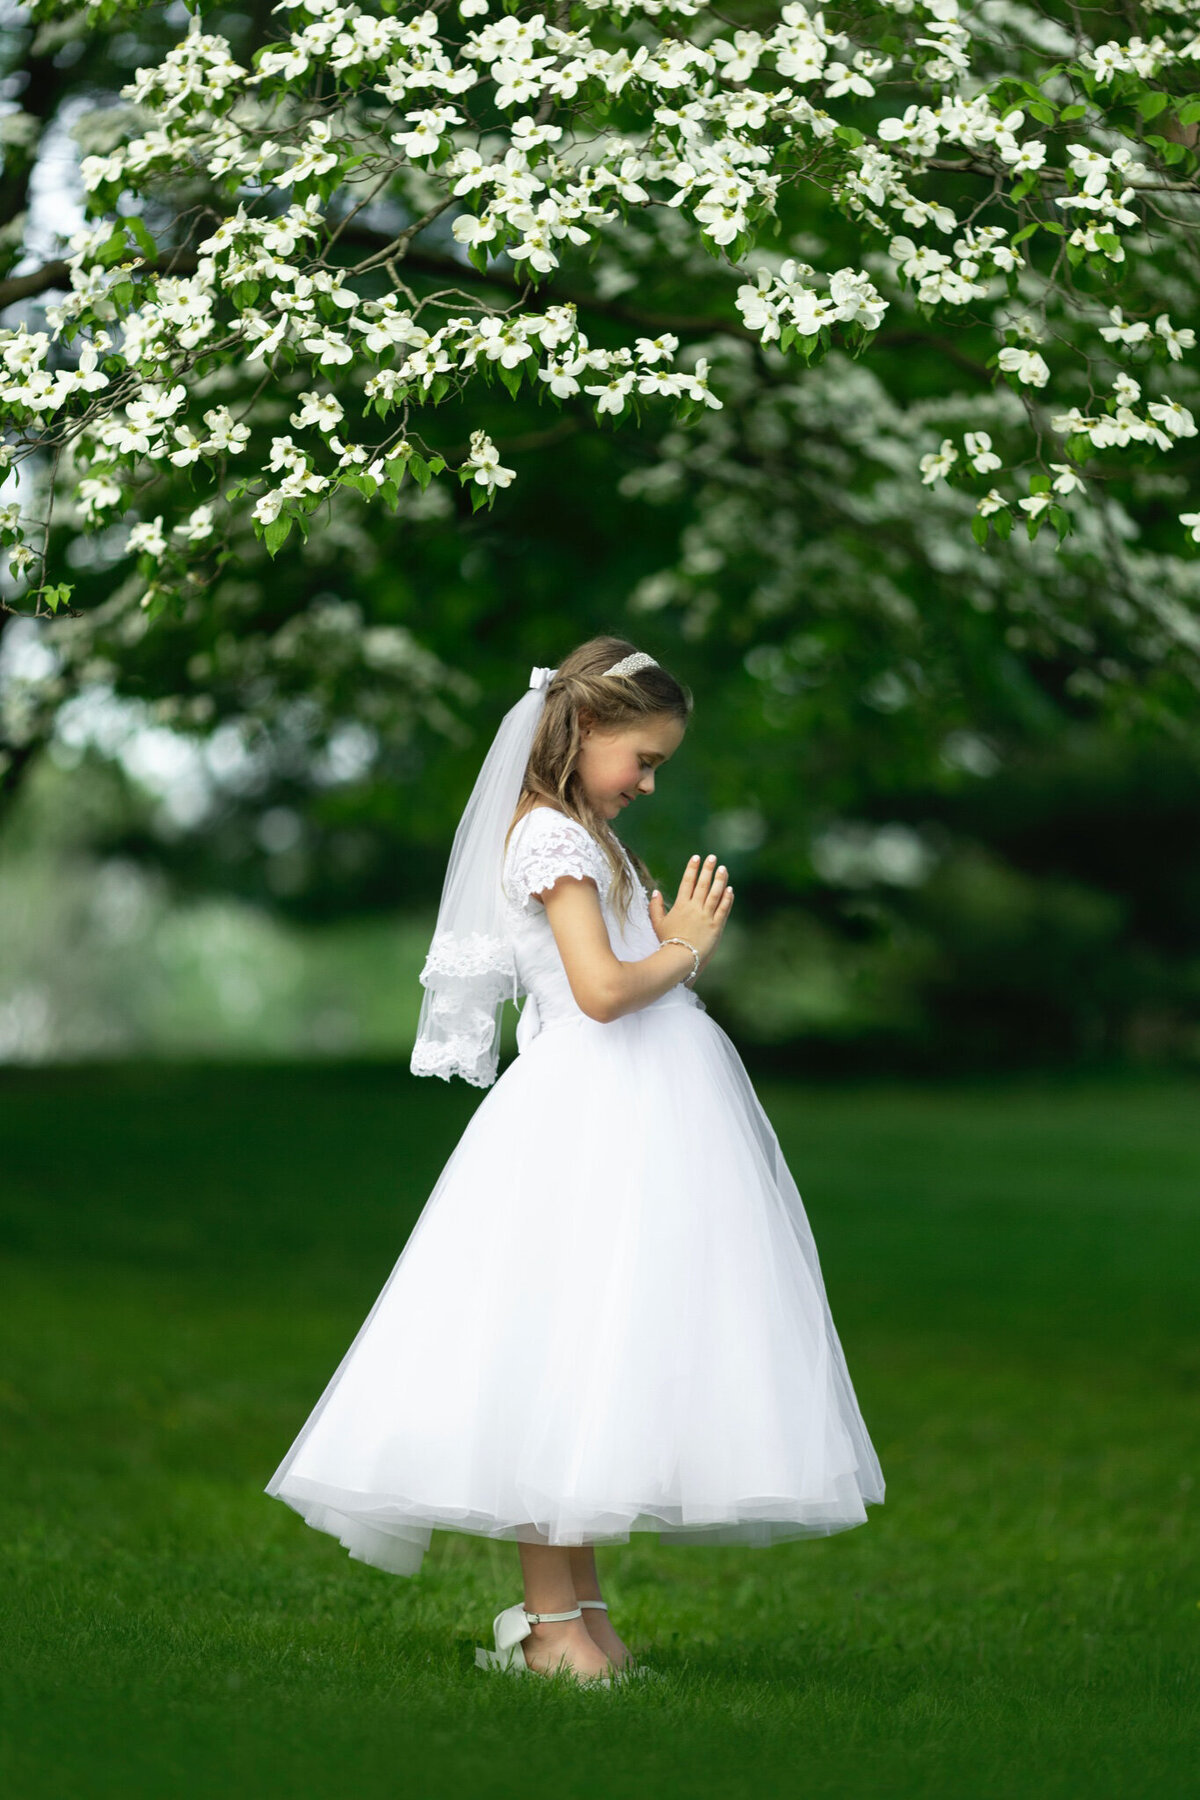 A young girl prays in a lawn under some flowering trees in a park wearing a white communion dress